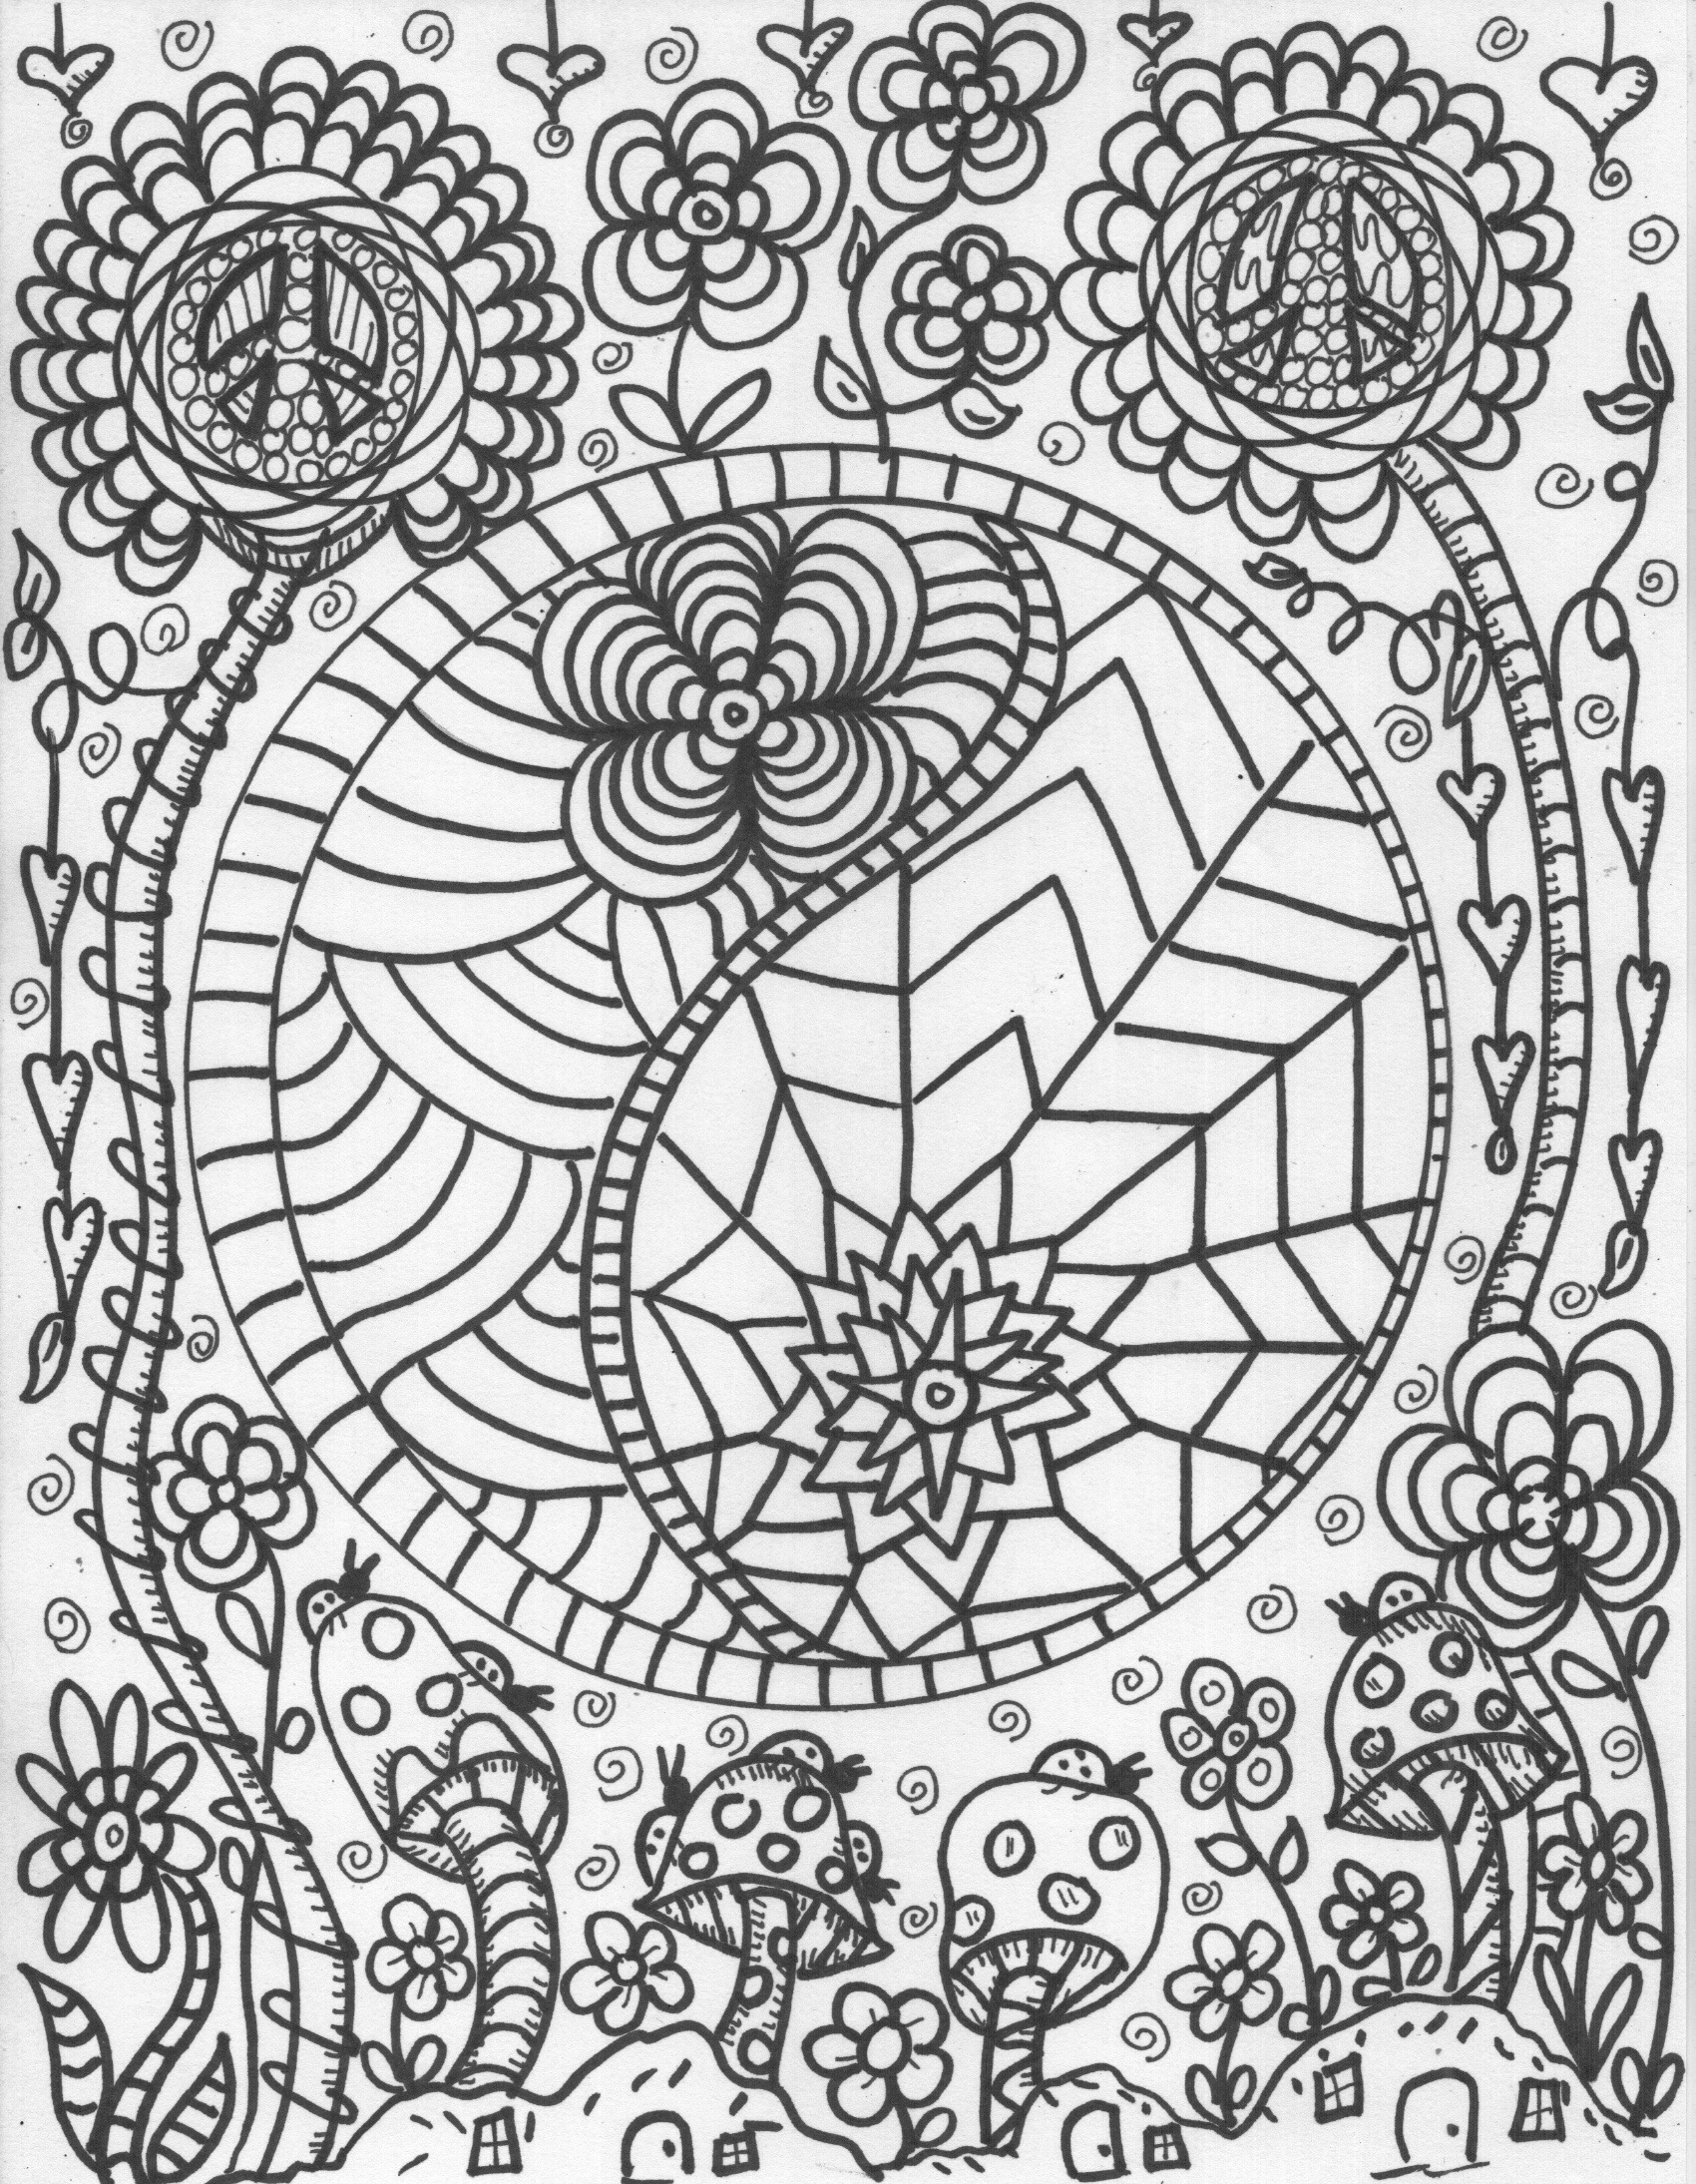 Hippie Coloring Pages Printable at Free printable